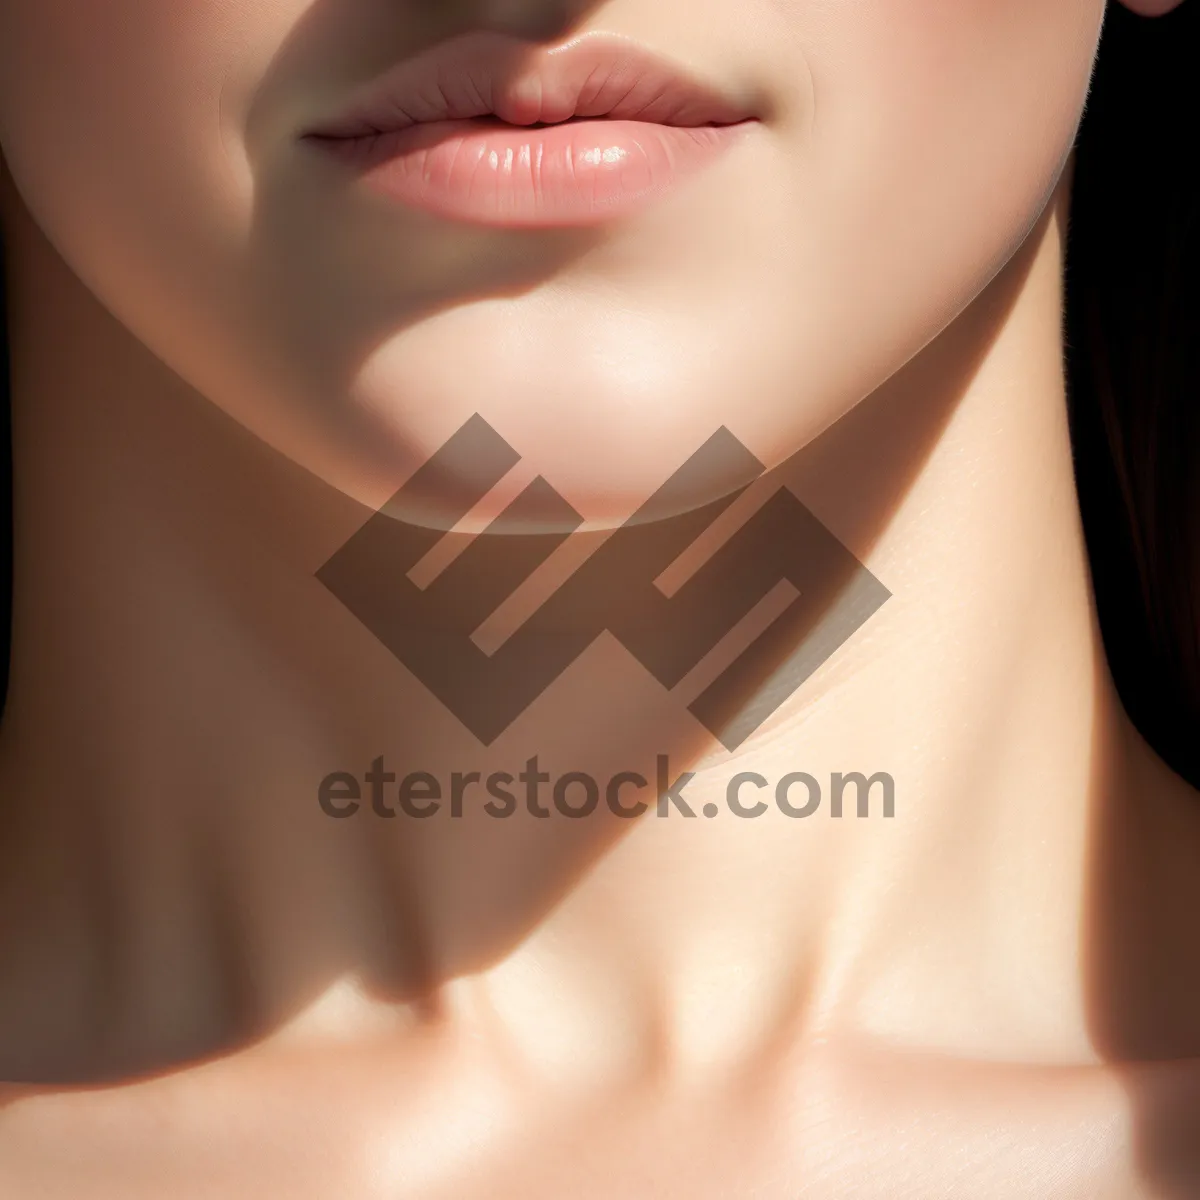 Picture of Radiant Beauty: Stunning Portrait of Attractive Adult with Clean Skincare